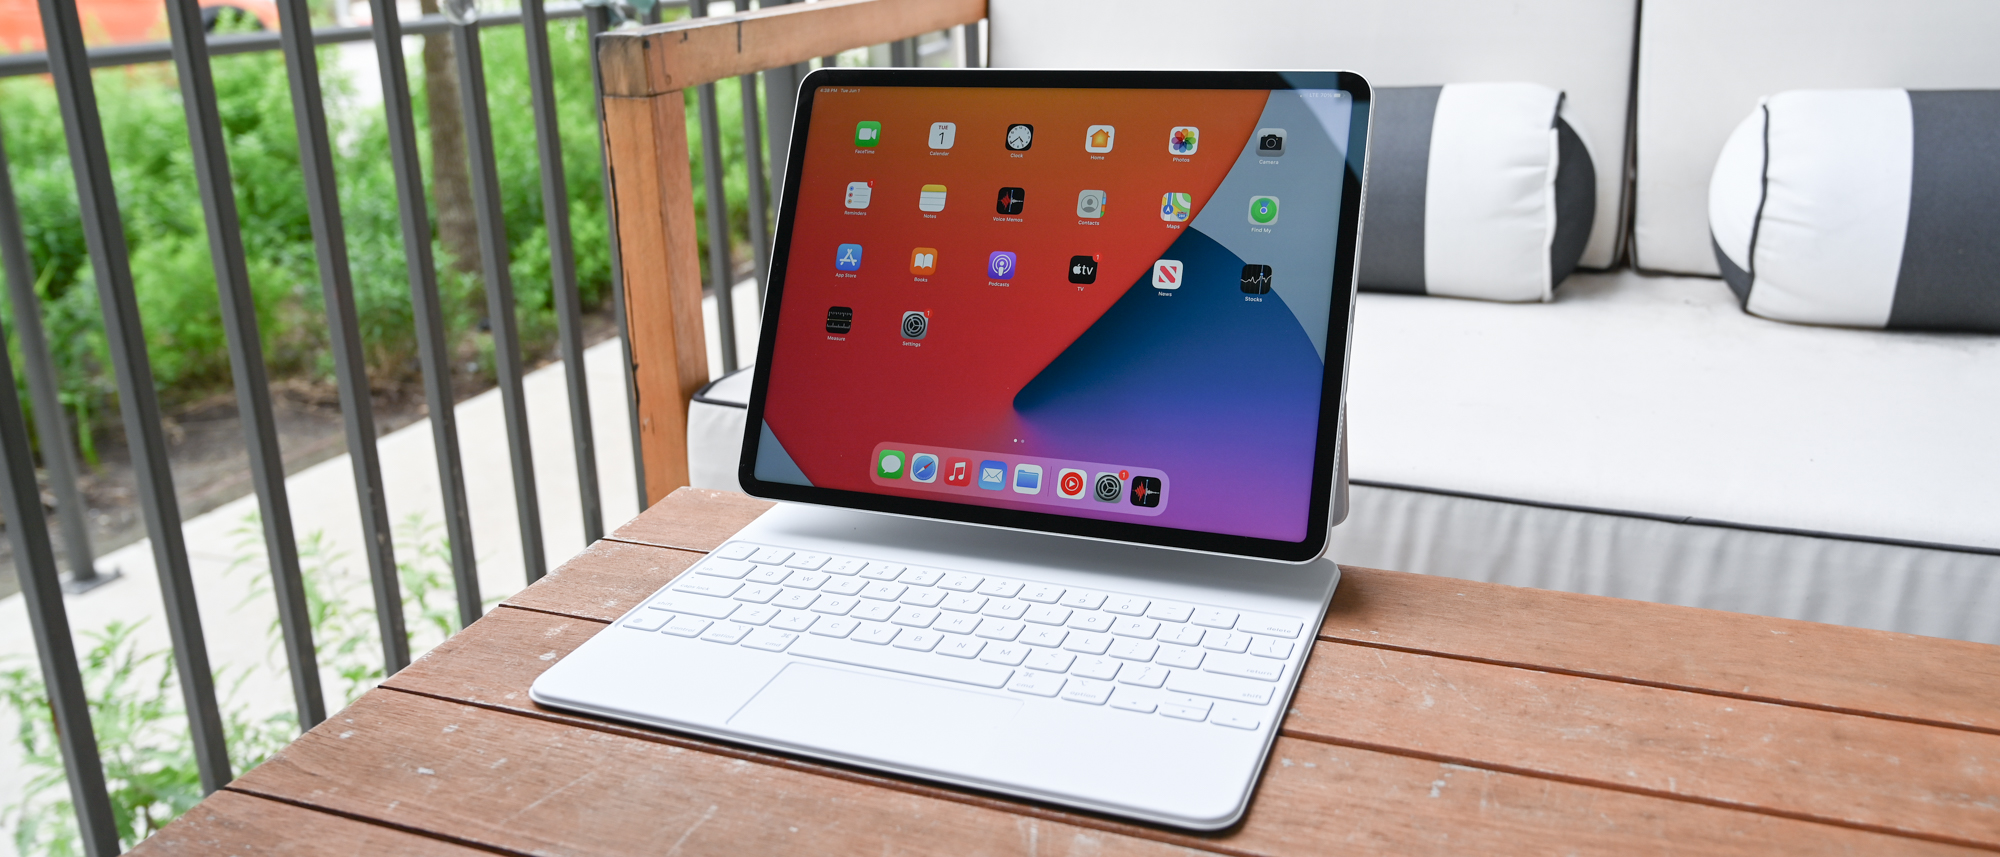 iPad Pro 2021 (12.9-inch) review | Laptop Mag